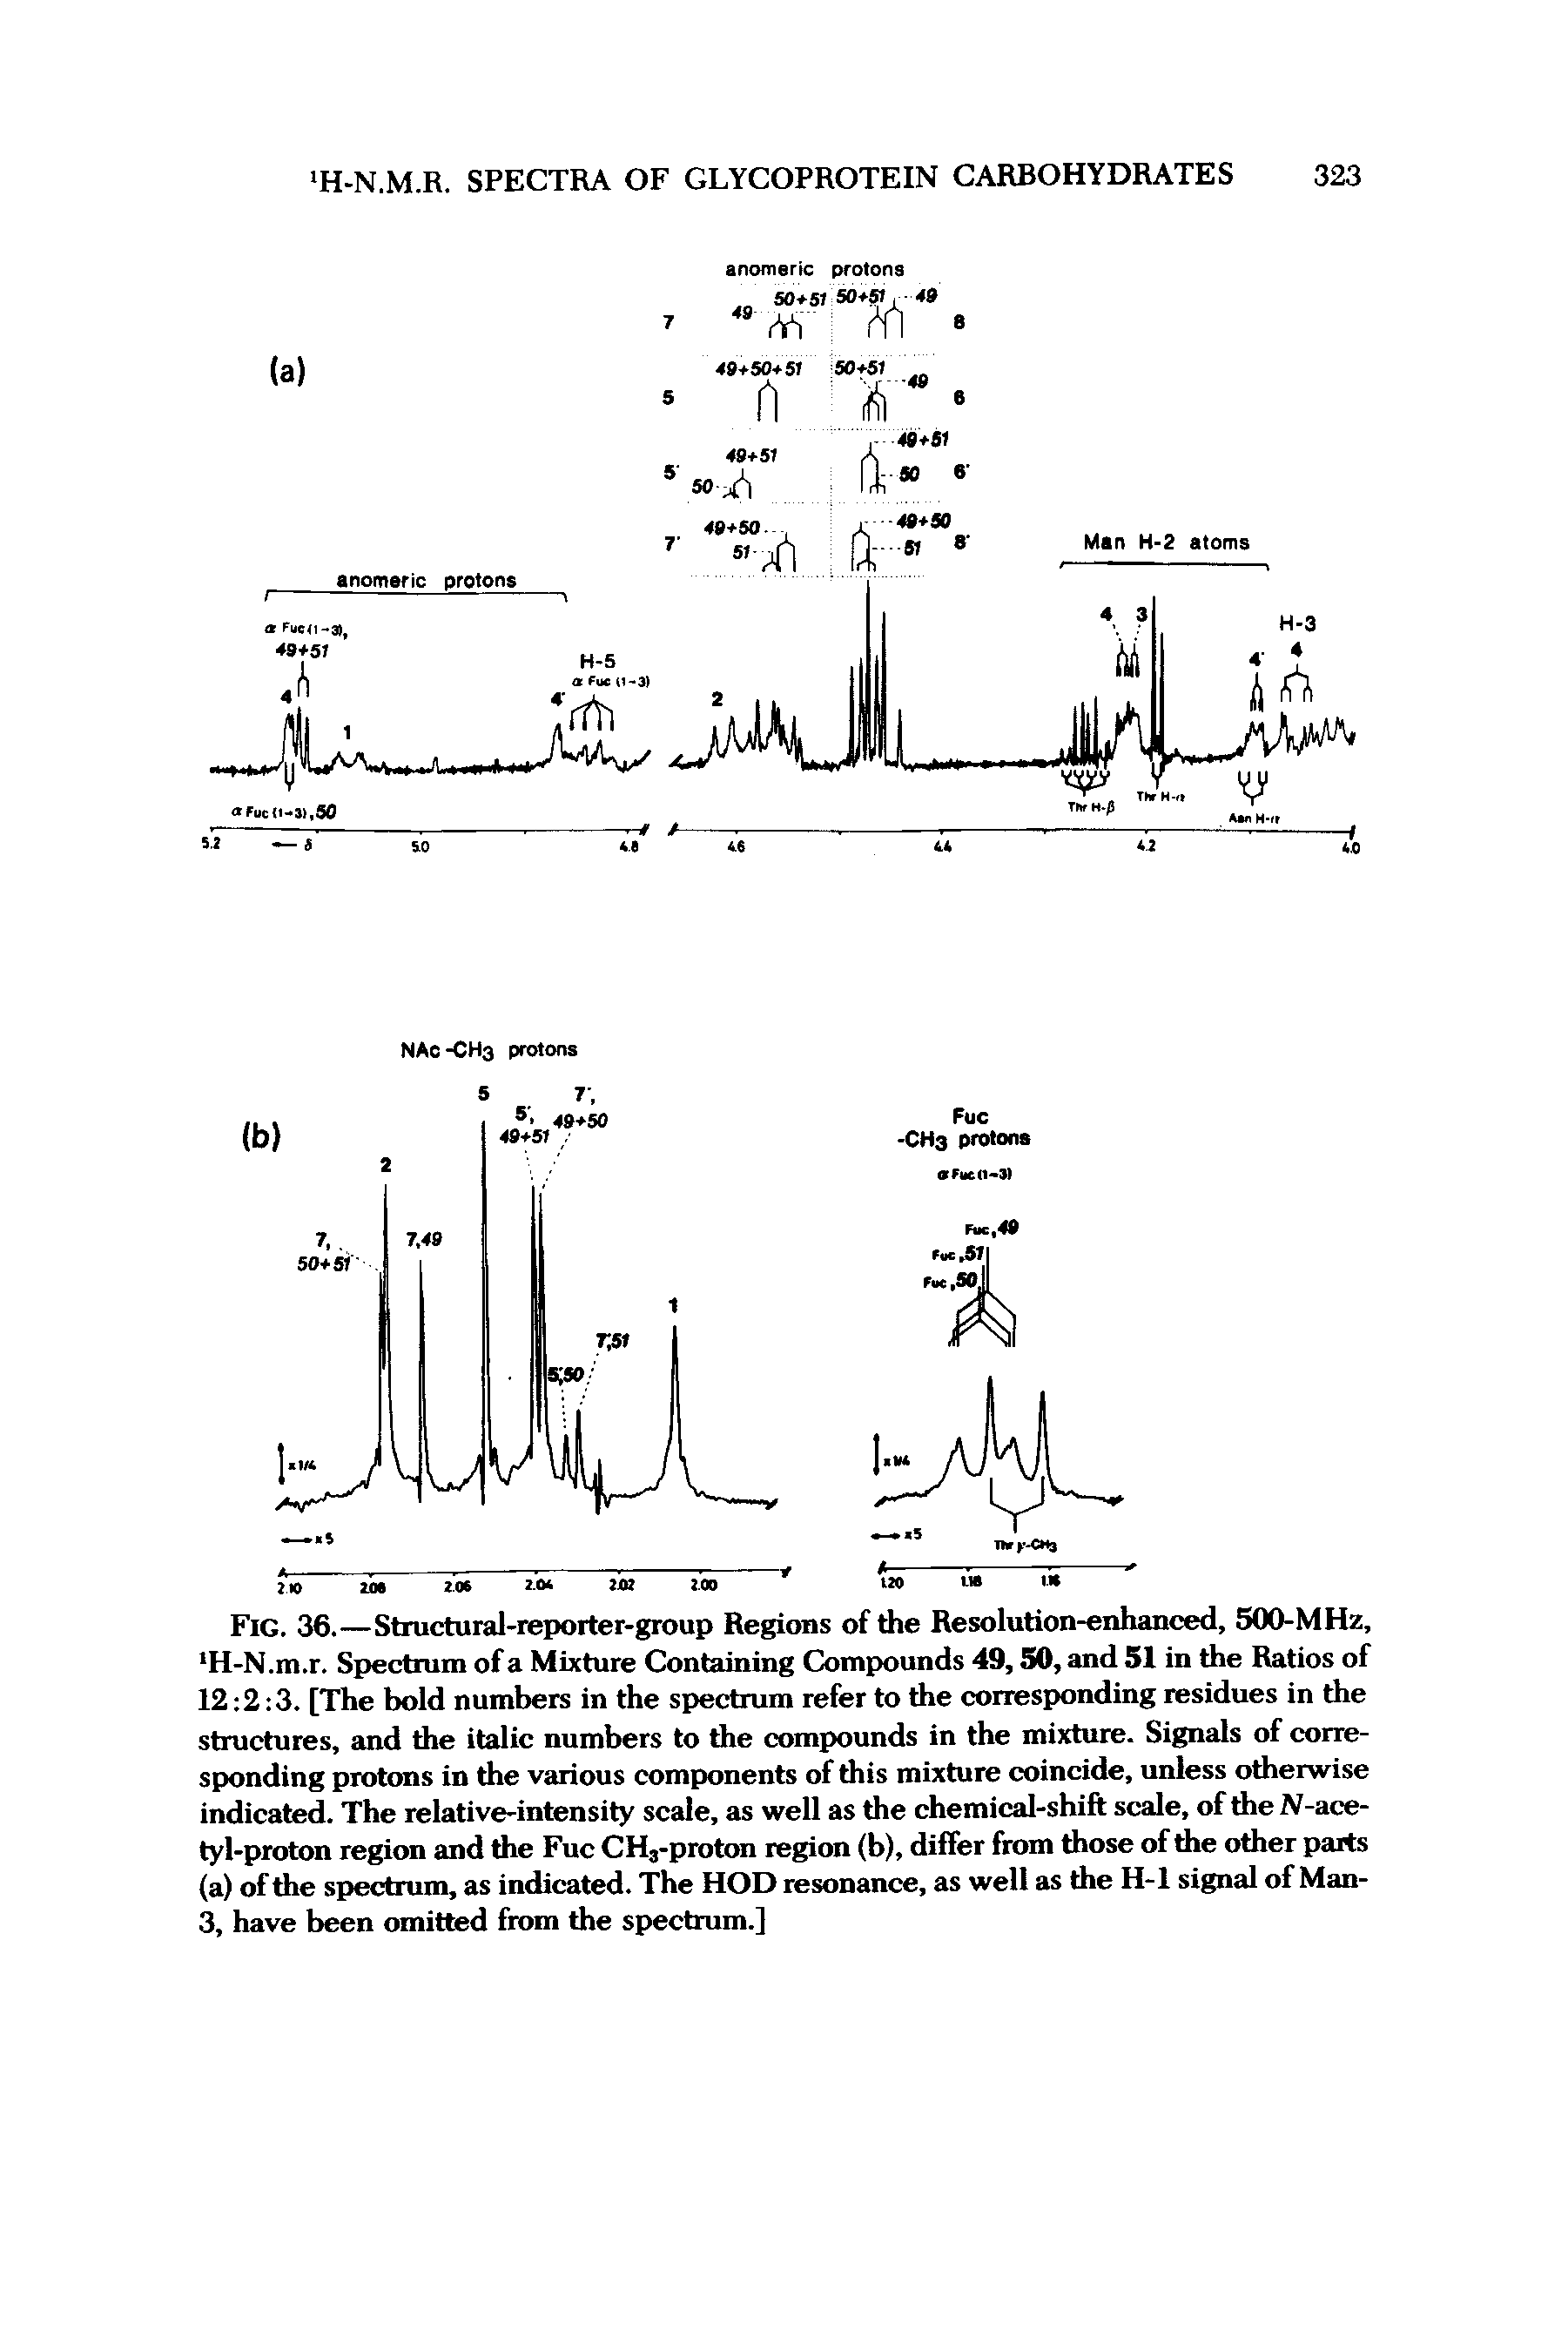 Fig. 36.—Structural-reporter-group Regions of the Resolution-enhanced, 500-MHz, H-N.m.r. Spectrum of a Mixture Containing Compounds 49,50, and 51 in the Ratios of 12 2 3. [The bold numbers in the spectrum refer to the corresponding residues in the structures, and die italic numbers to the compounds in the mixture. Signals of corresponding protons in the various components of this mixture coincide, unless otherwise indicated. The relative-intensity scale, as well as the chemical-shift scale, of the N-acetyl-proton region and the Fuc CH3-proton region (b), differ from those of the other parts (a) of the spectrum, as indicated. The HOD resonance, as well as the H-l signal of Man-3, have been omitted from the spectrum.]...